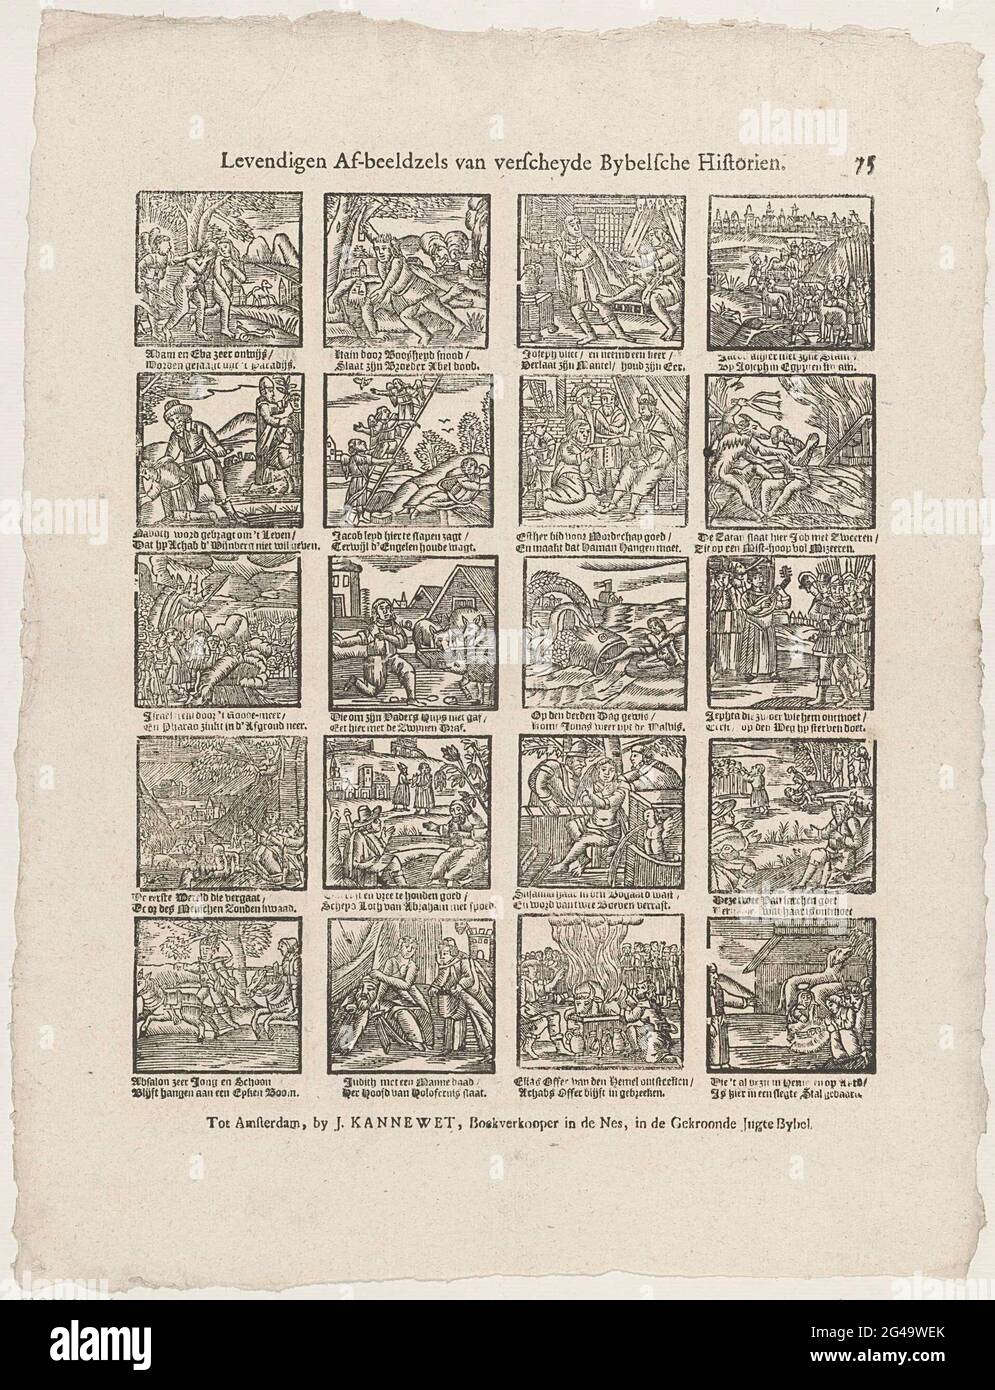 Lifive Afscels from Gifted Bybelsche Historien. Sheet with 20 representations of stories from the Old Testament, including Adam and Eve that are expelled from paradise and Jonah thrown in dryness. Under each image a two-legged fresh. Numbered at the top right: 75. Stock Photo